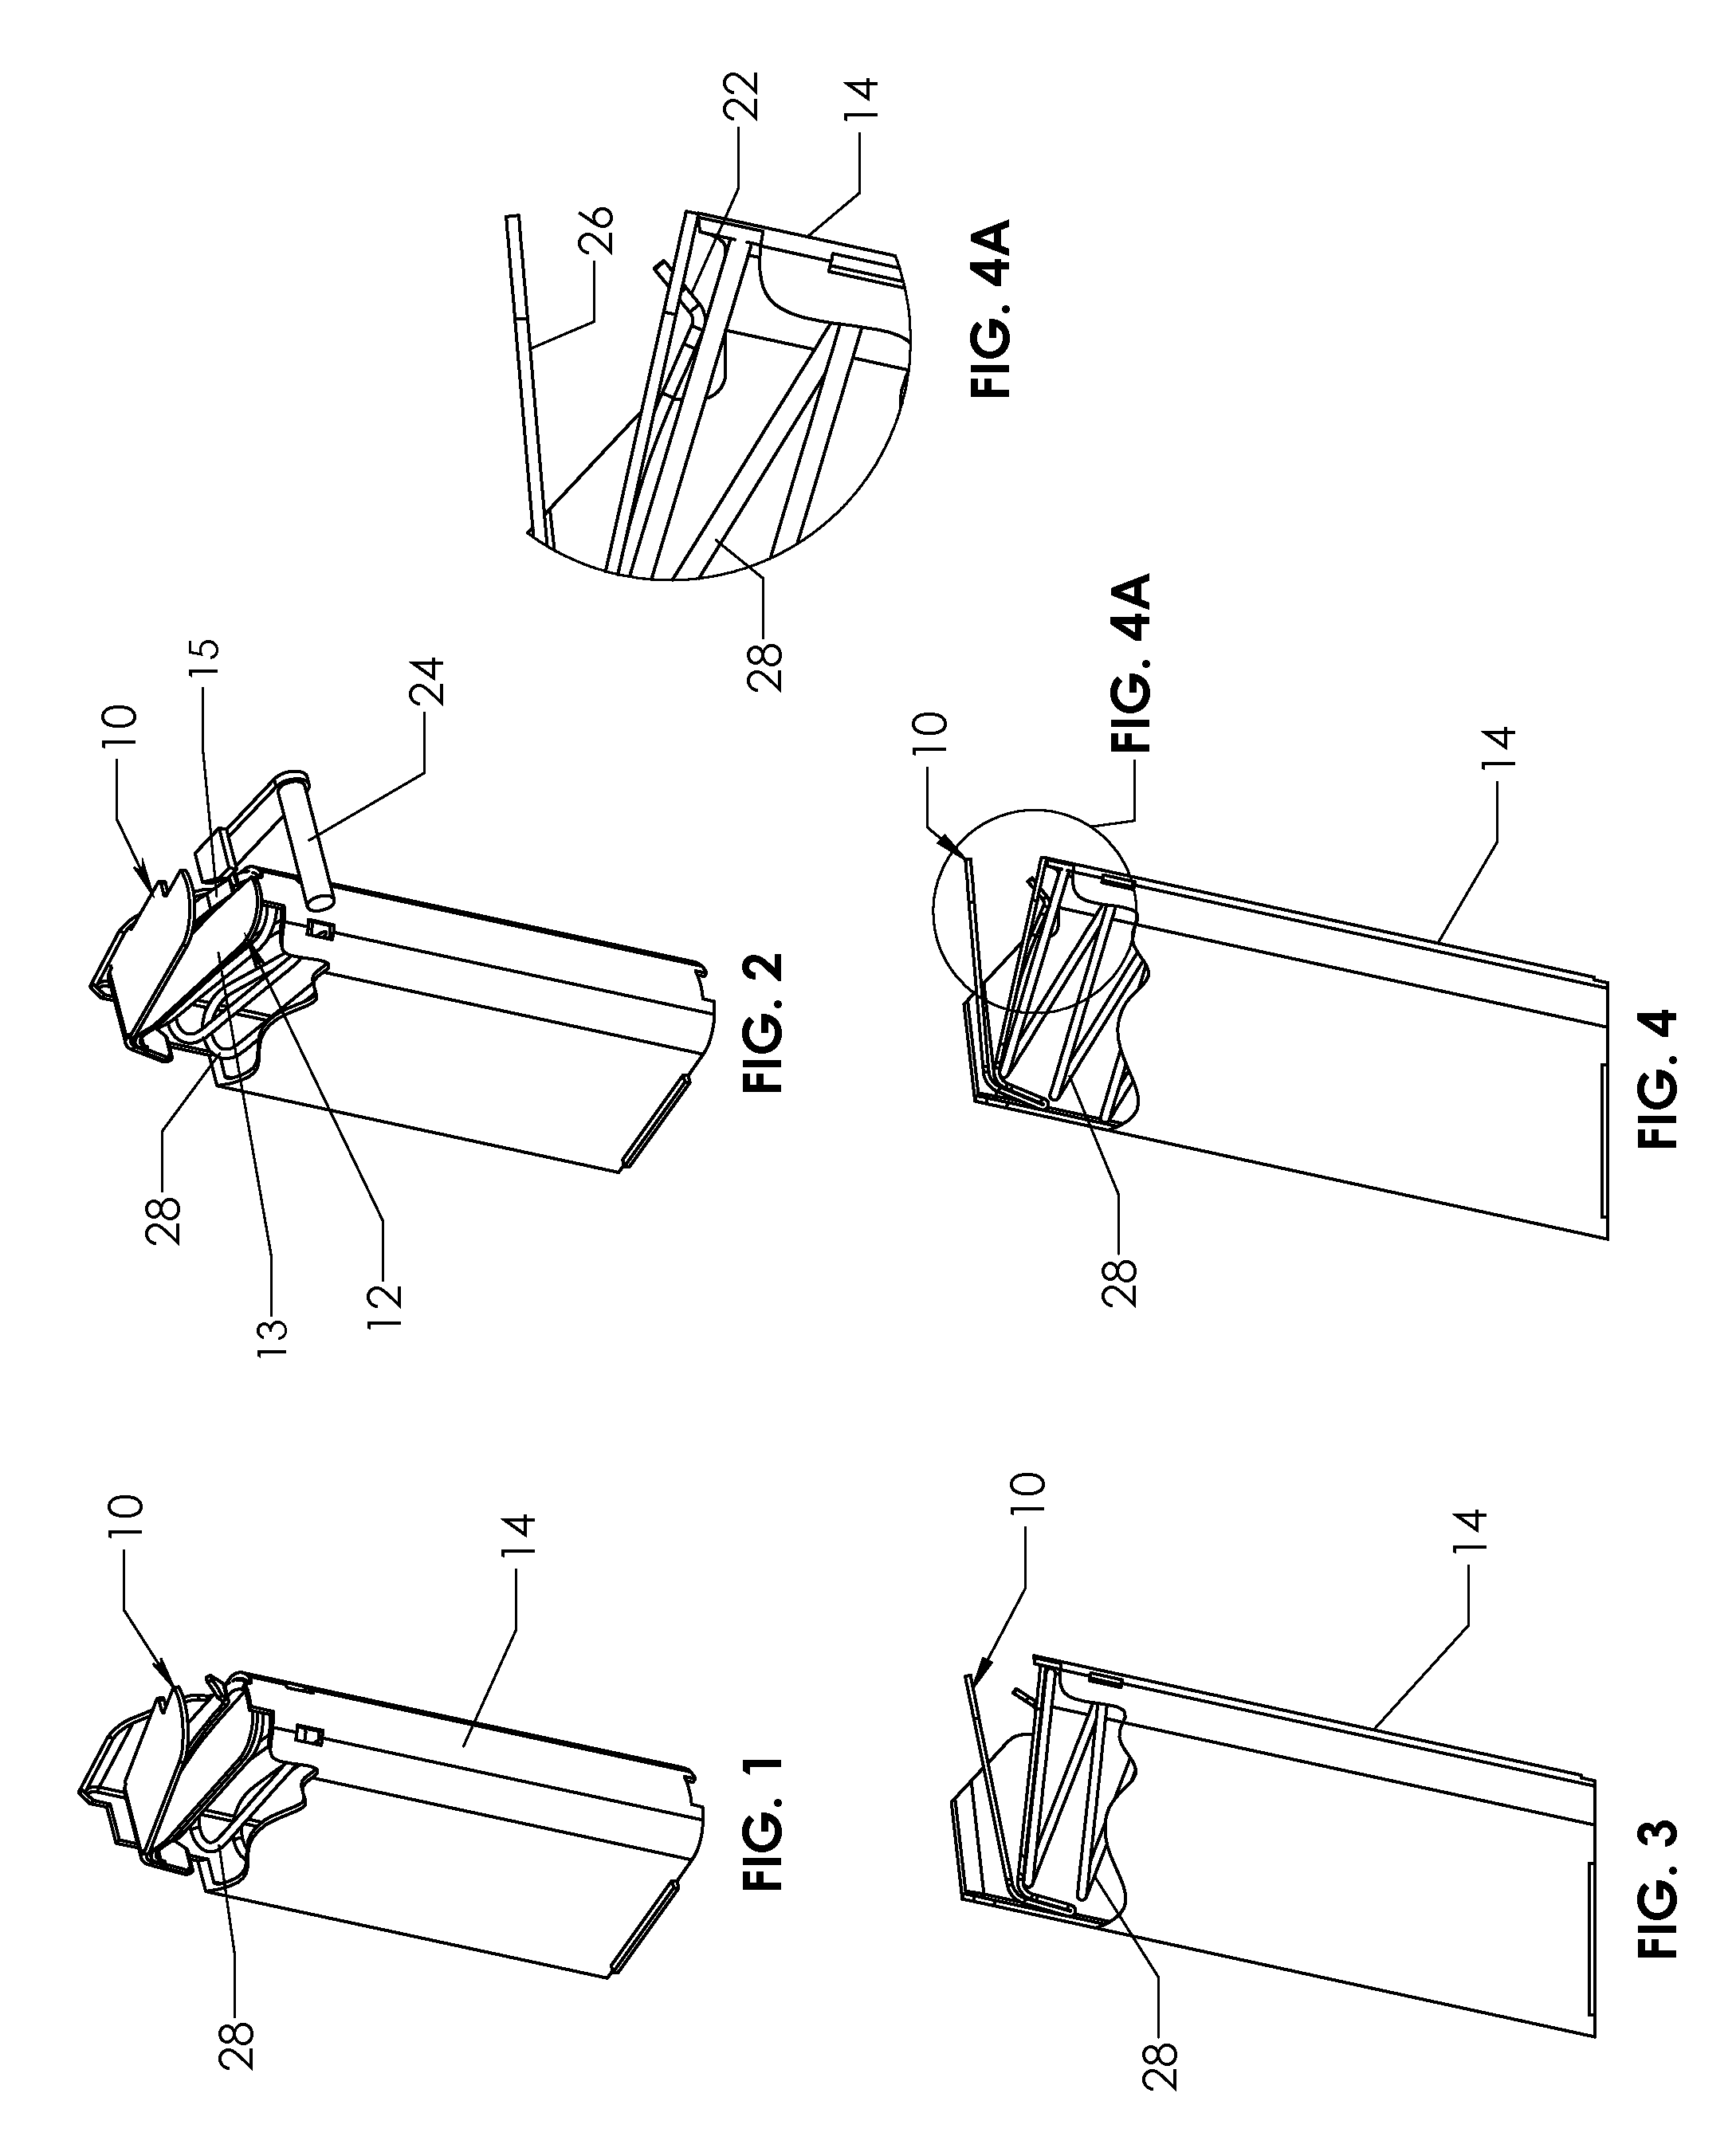 Low profile magazine follower with isolated slide lock lever